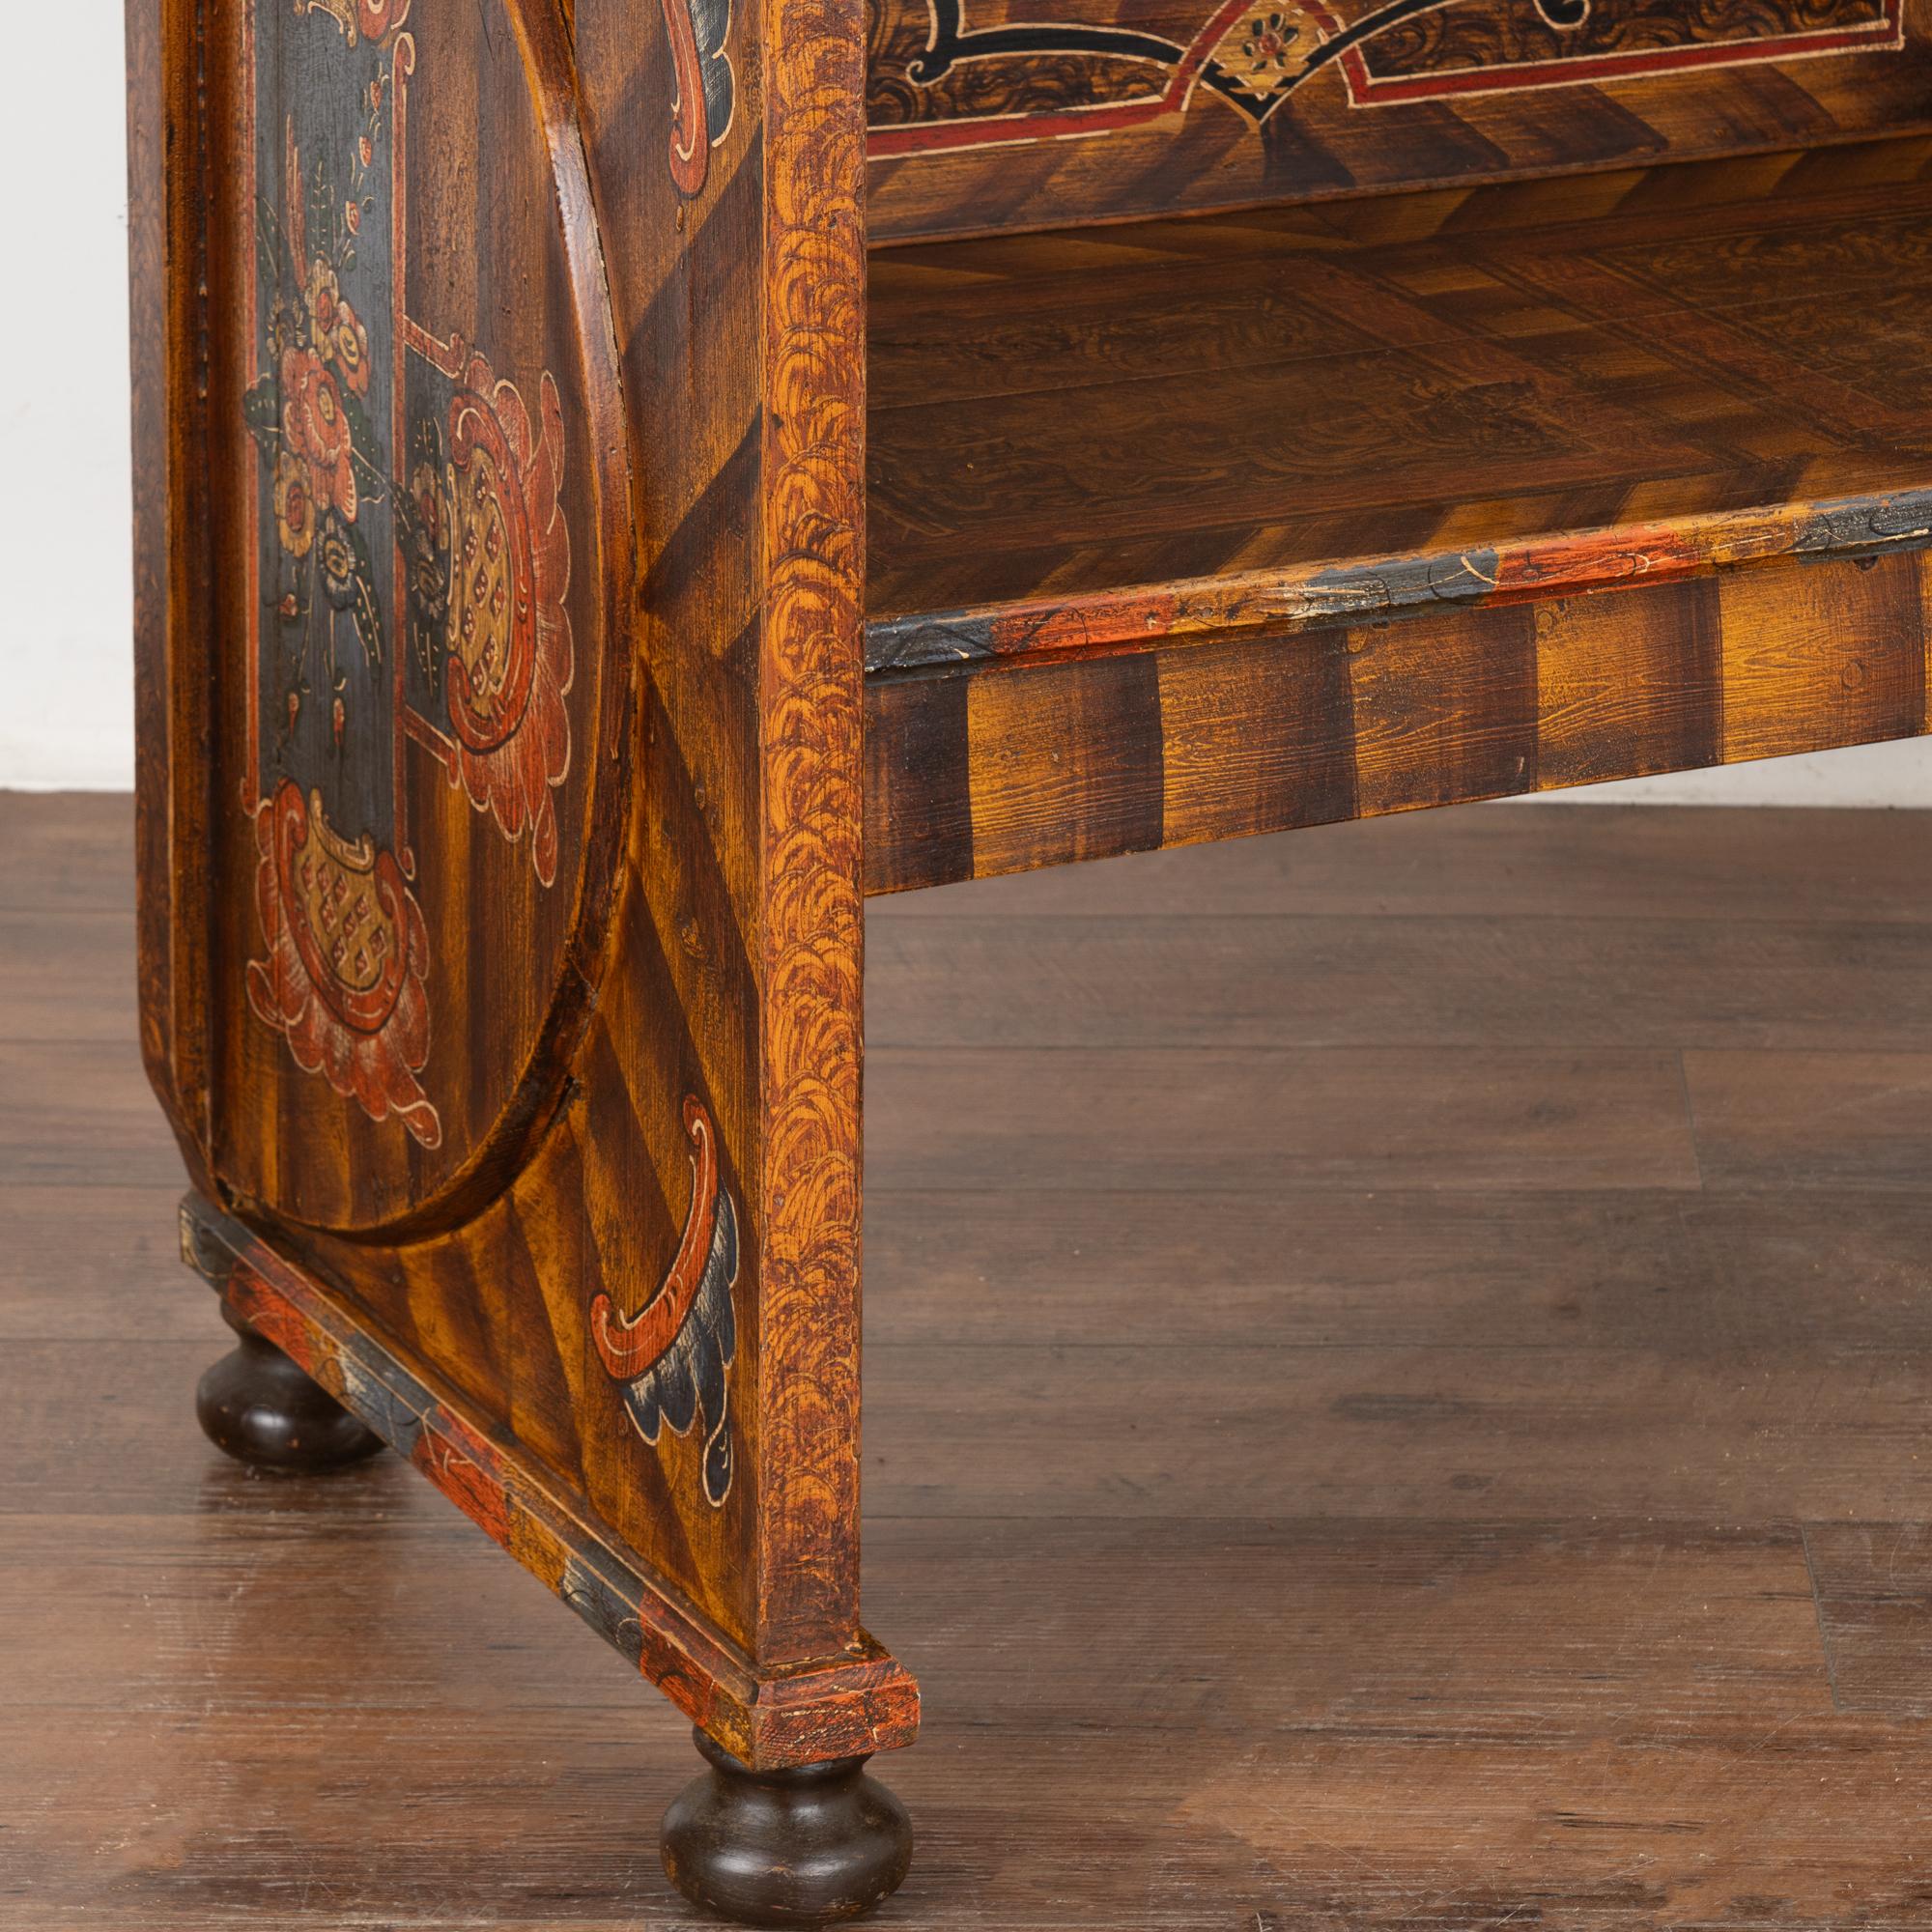 Folk Art Original Hand Painted Small Bench With High Back, Hungary circa 1860-80 For Sale